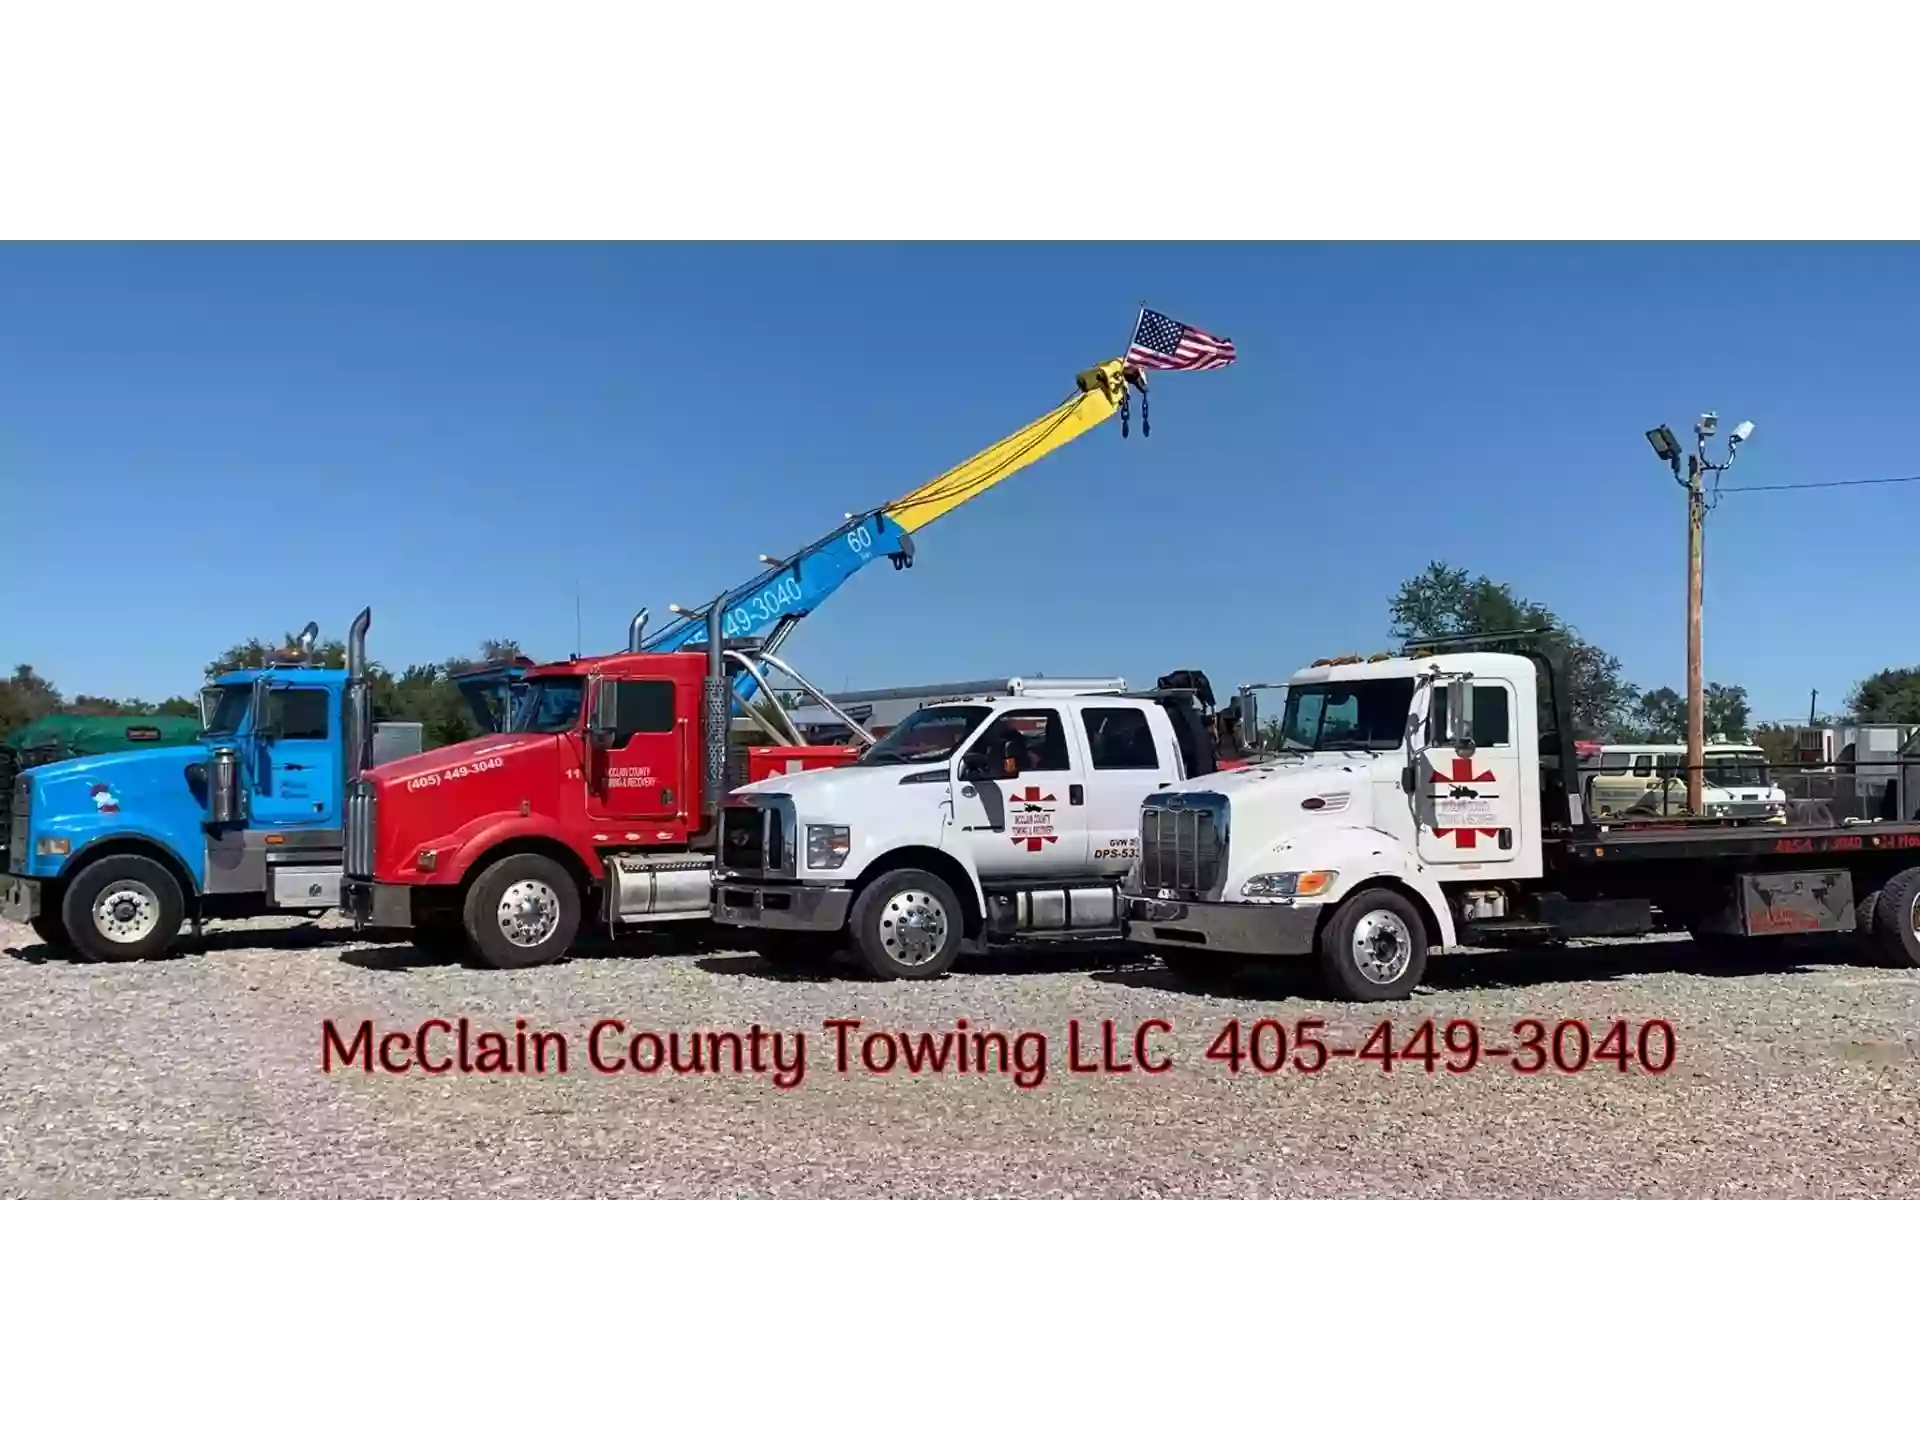 McClain County Towing